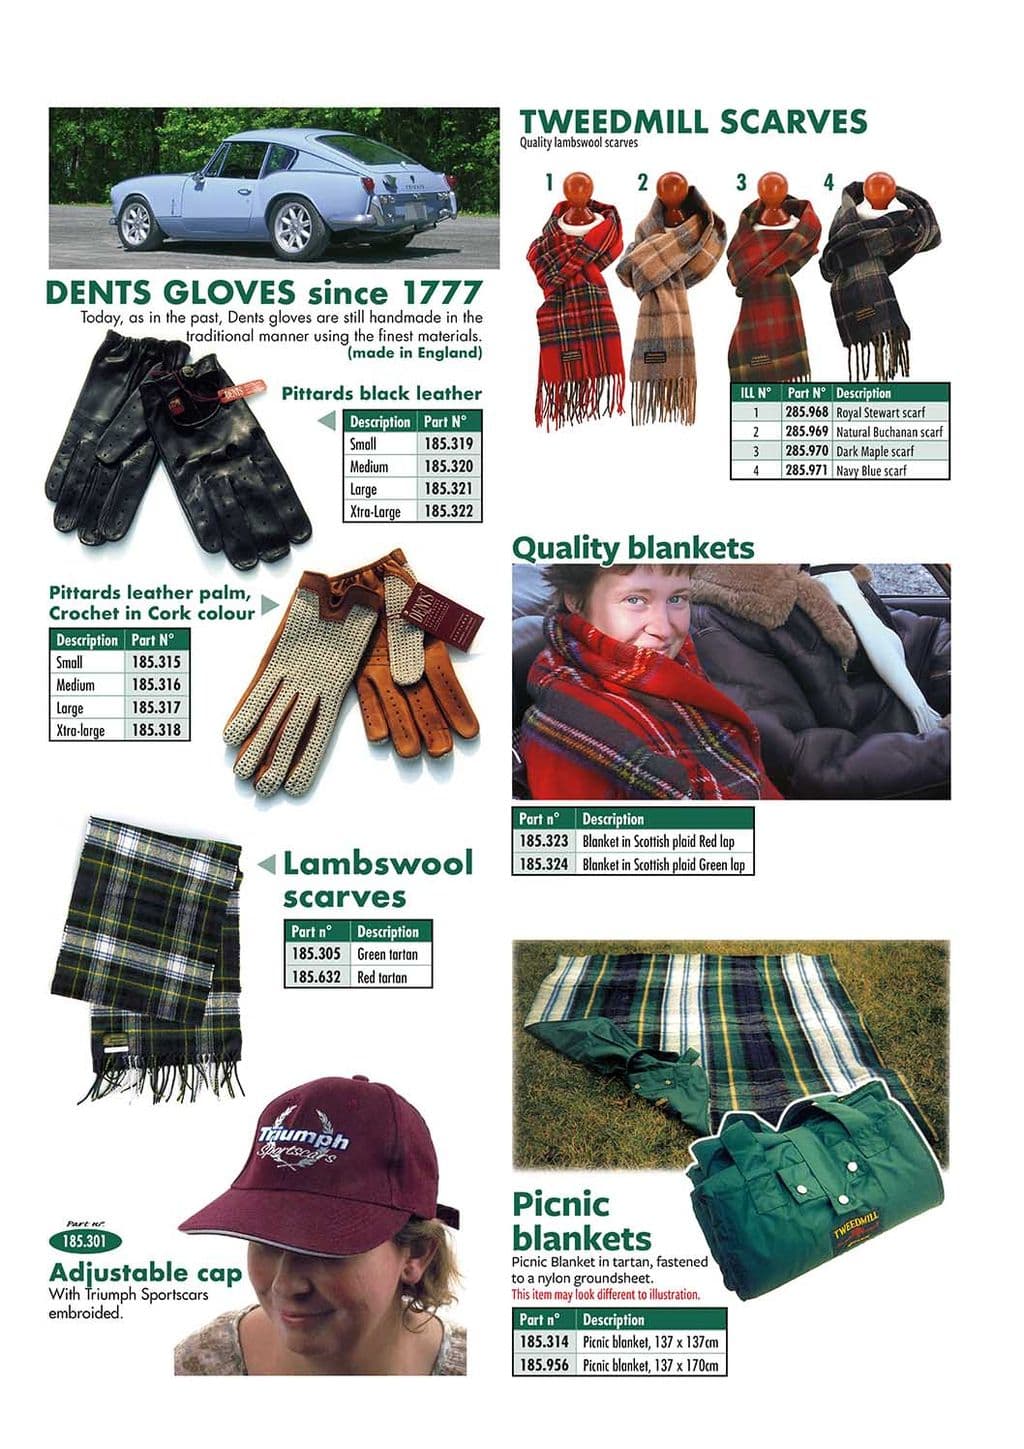 Drivers accessories - Hats & gloves - Books & Driver accessories - MGB 1962-1980 - Drivers accessories - 1